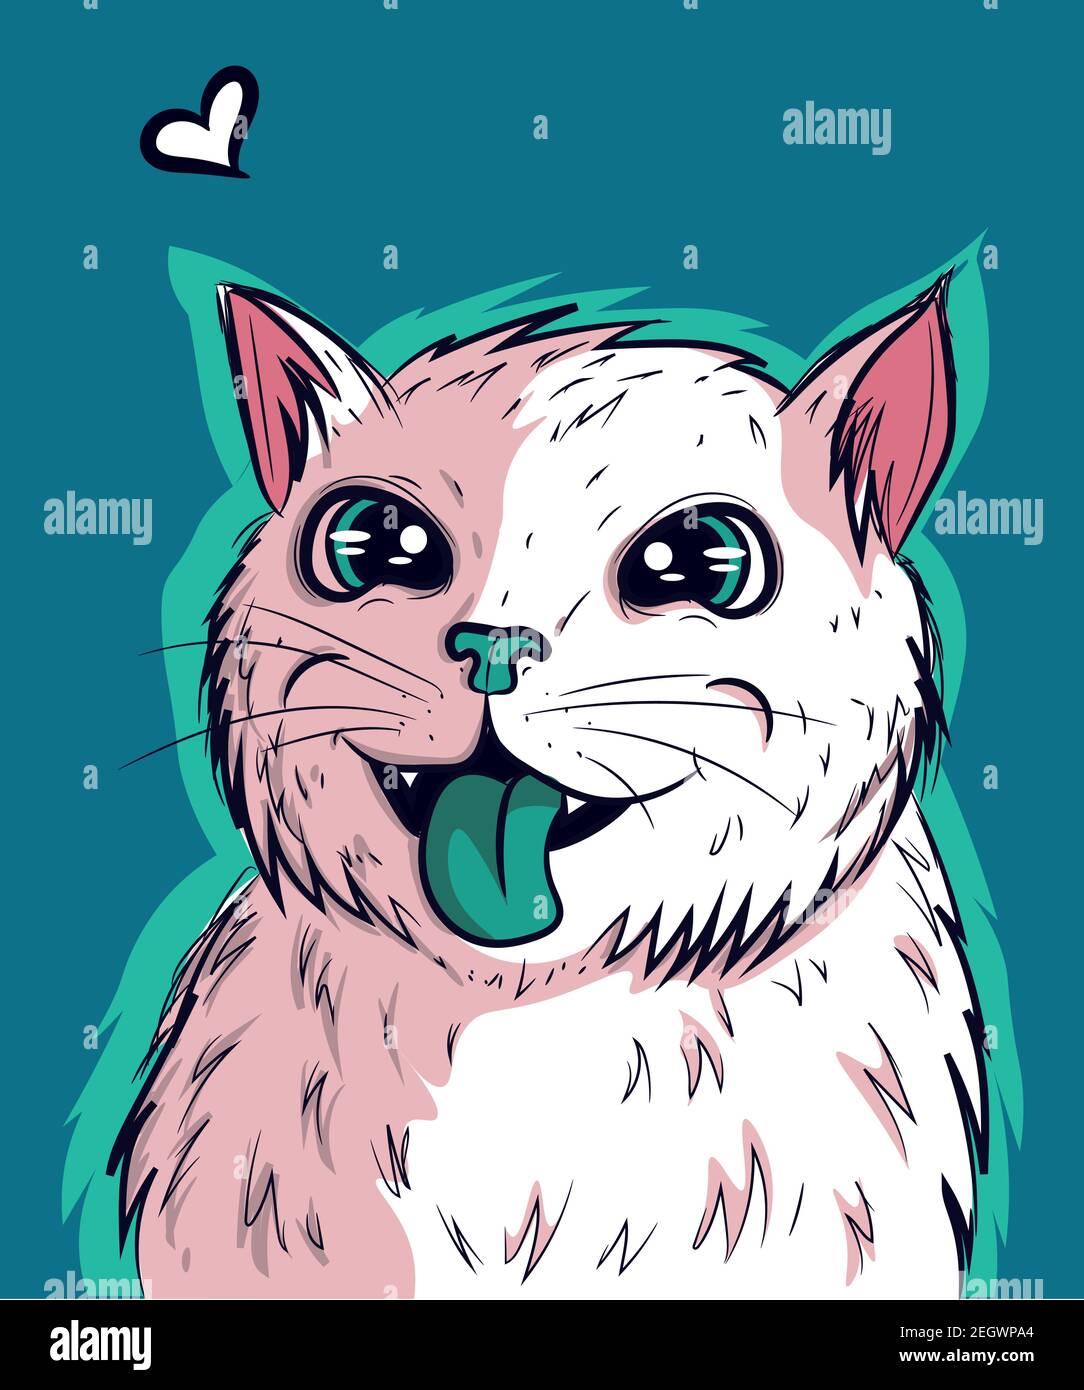 Vector of white kitty vibing with its green tongue out. Cat with big anime eyes and psychedelic look. Stock Vector